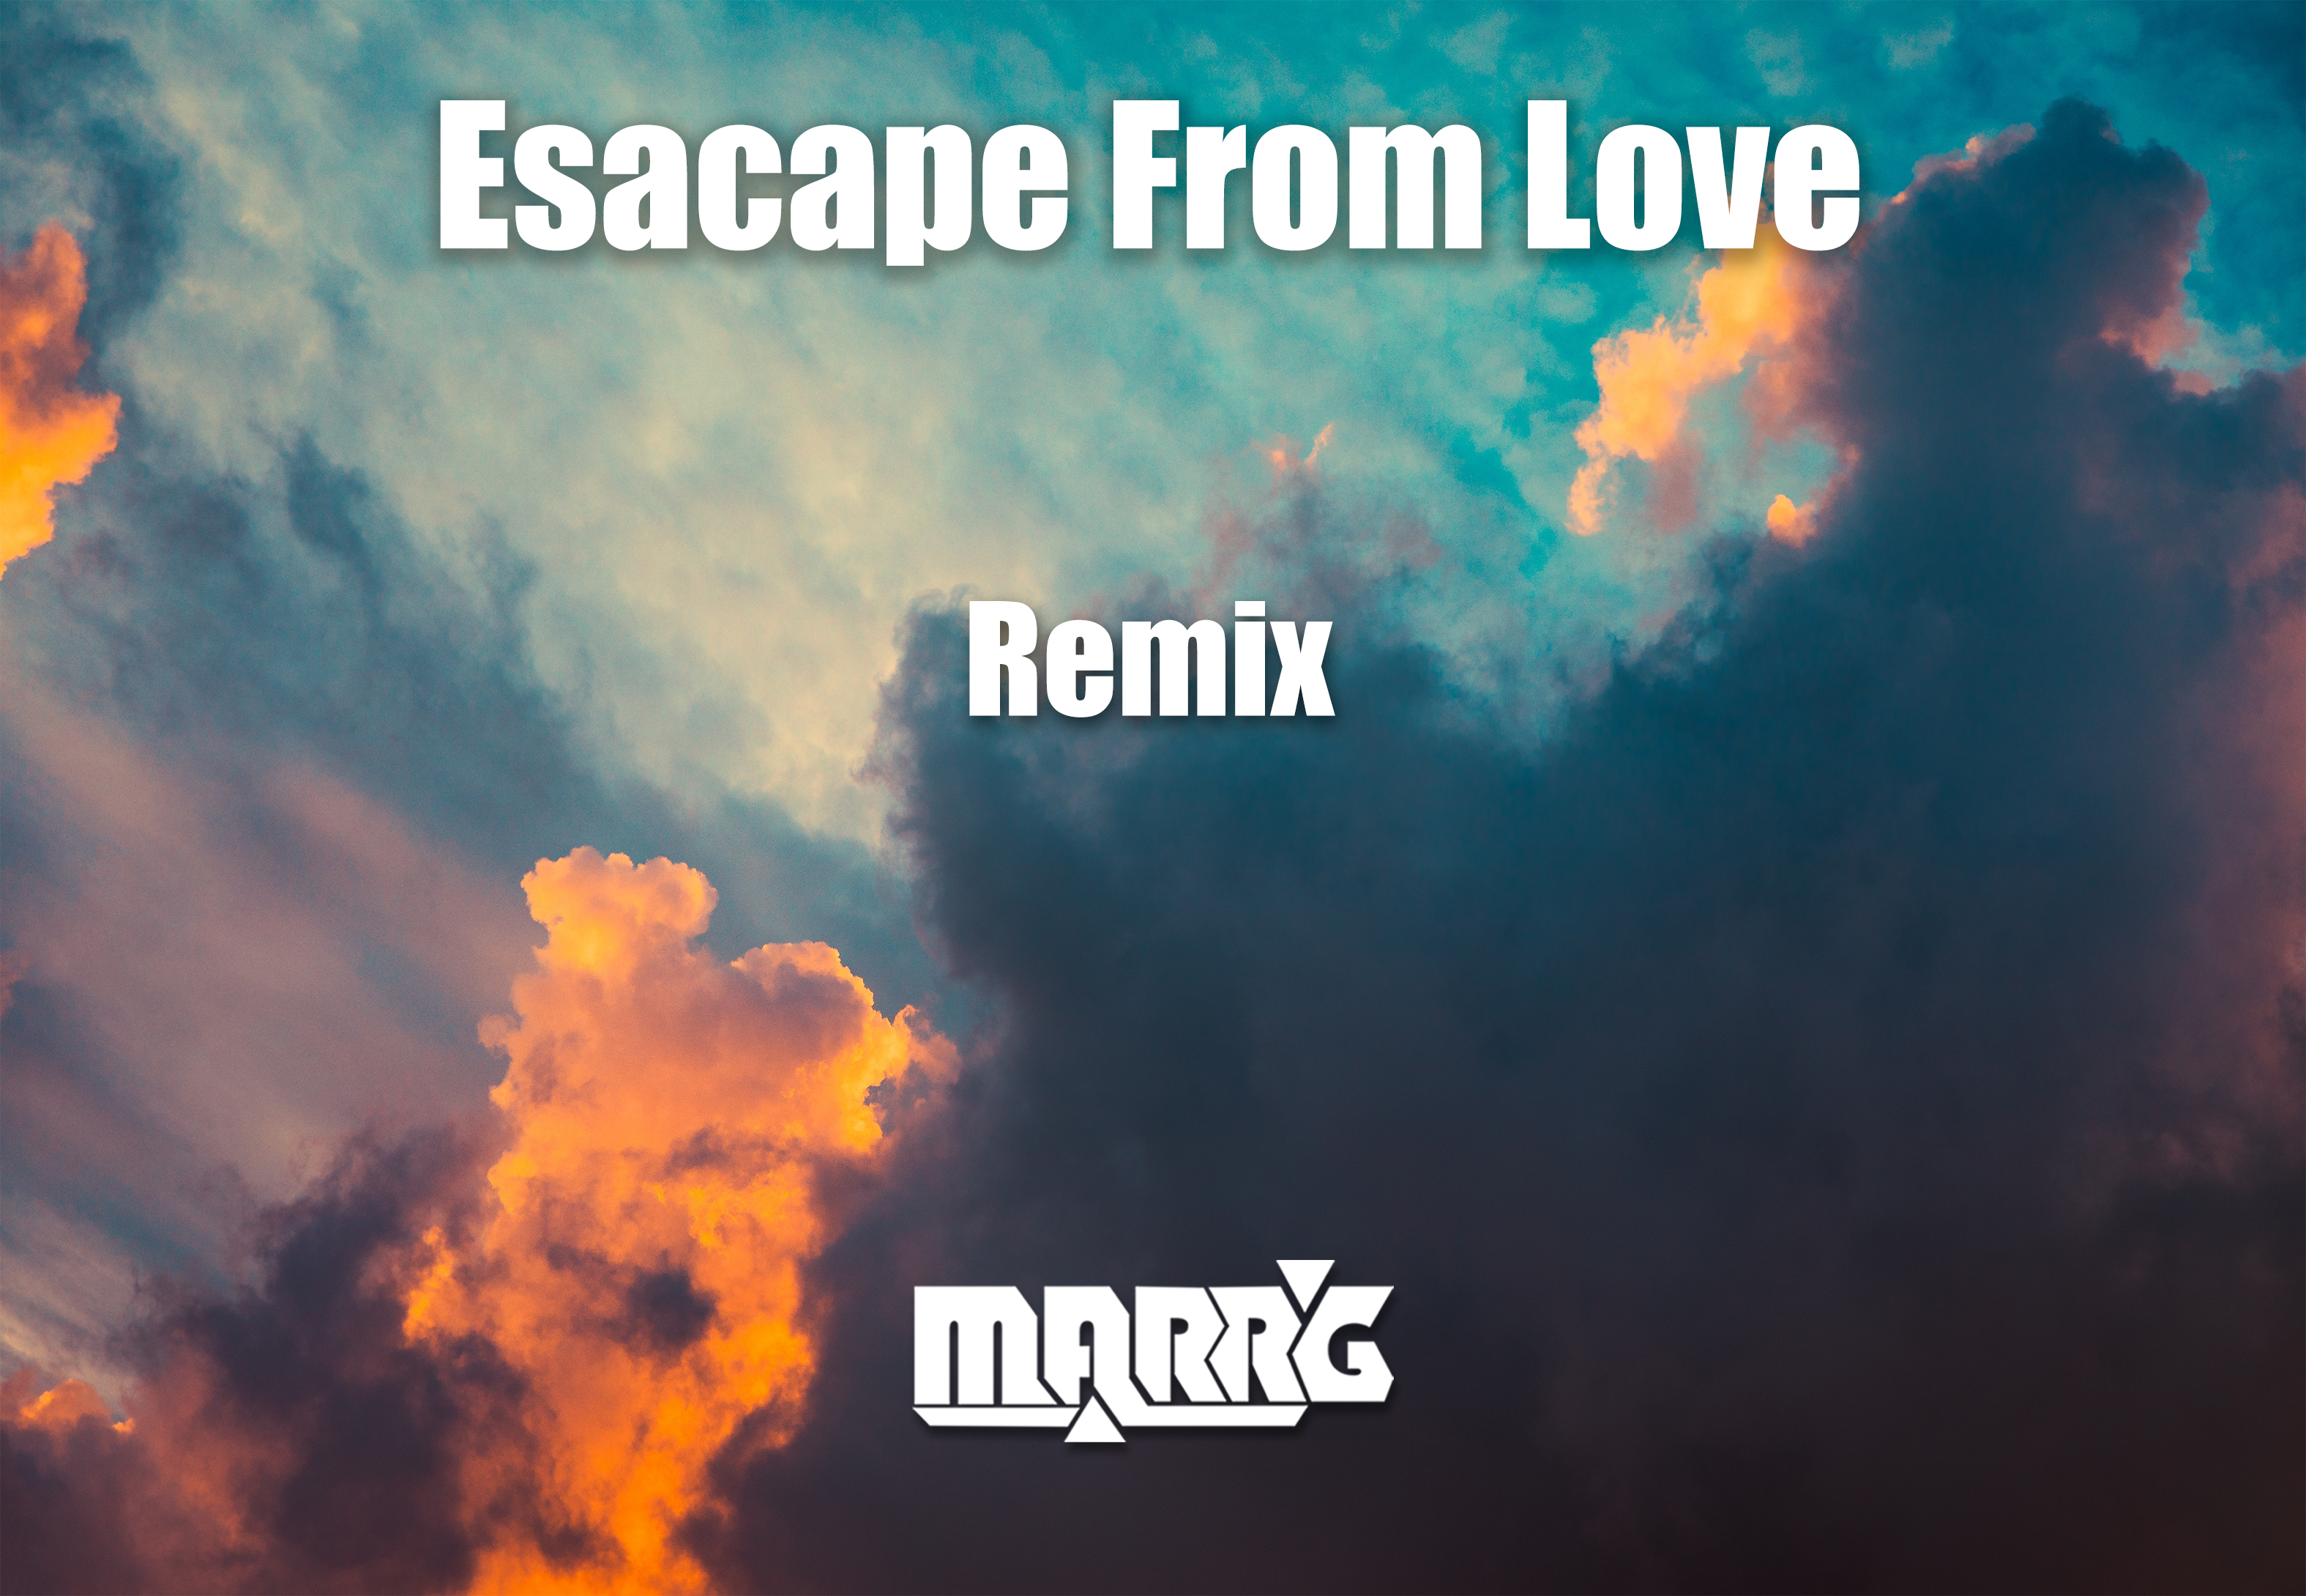 Escape  From  Love  Marrg  Remix